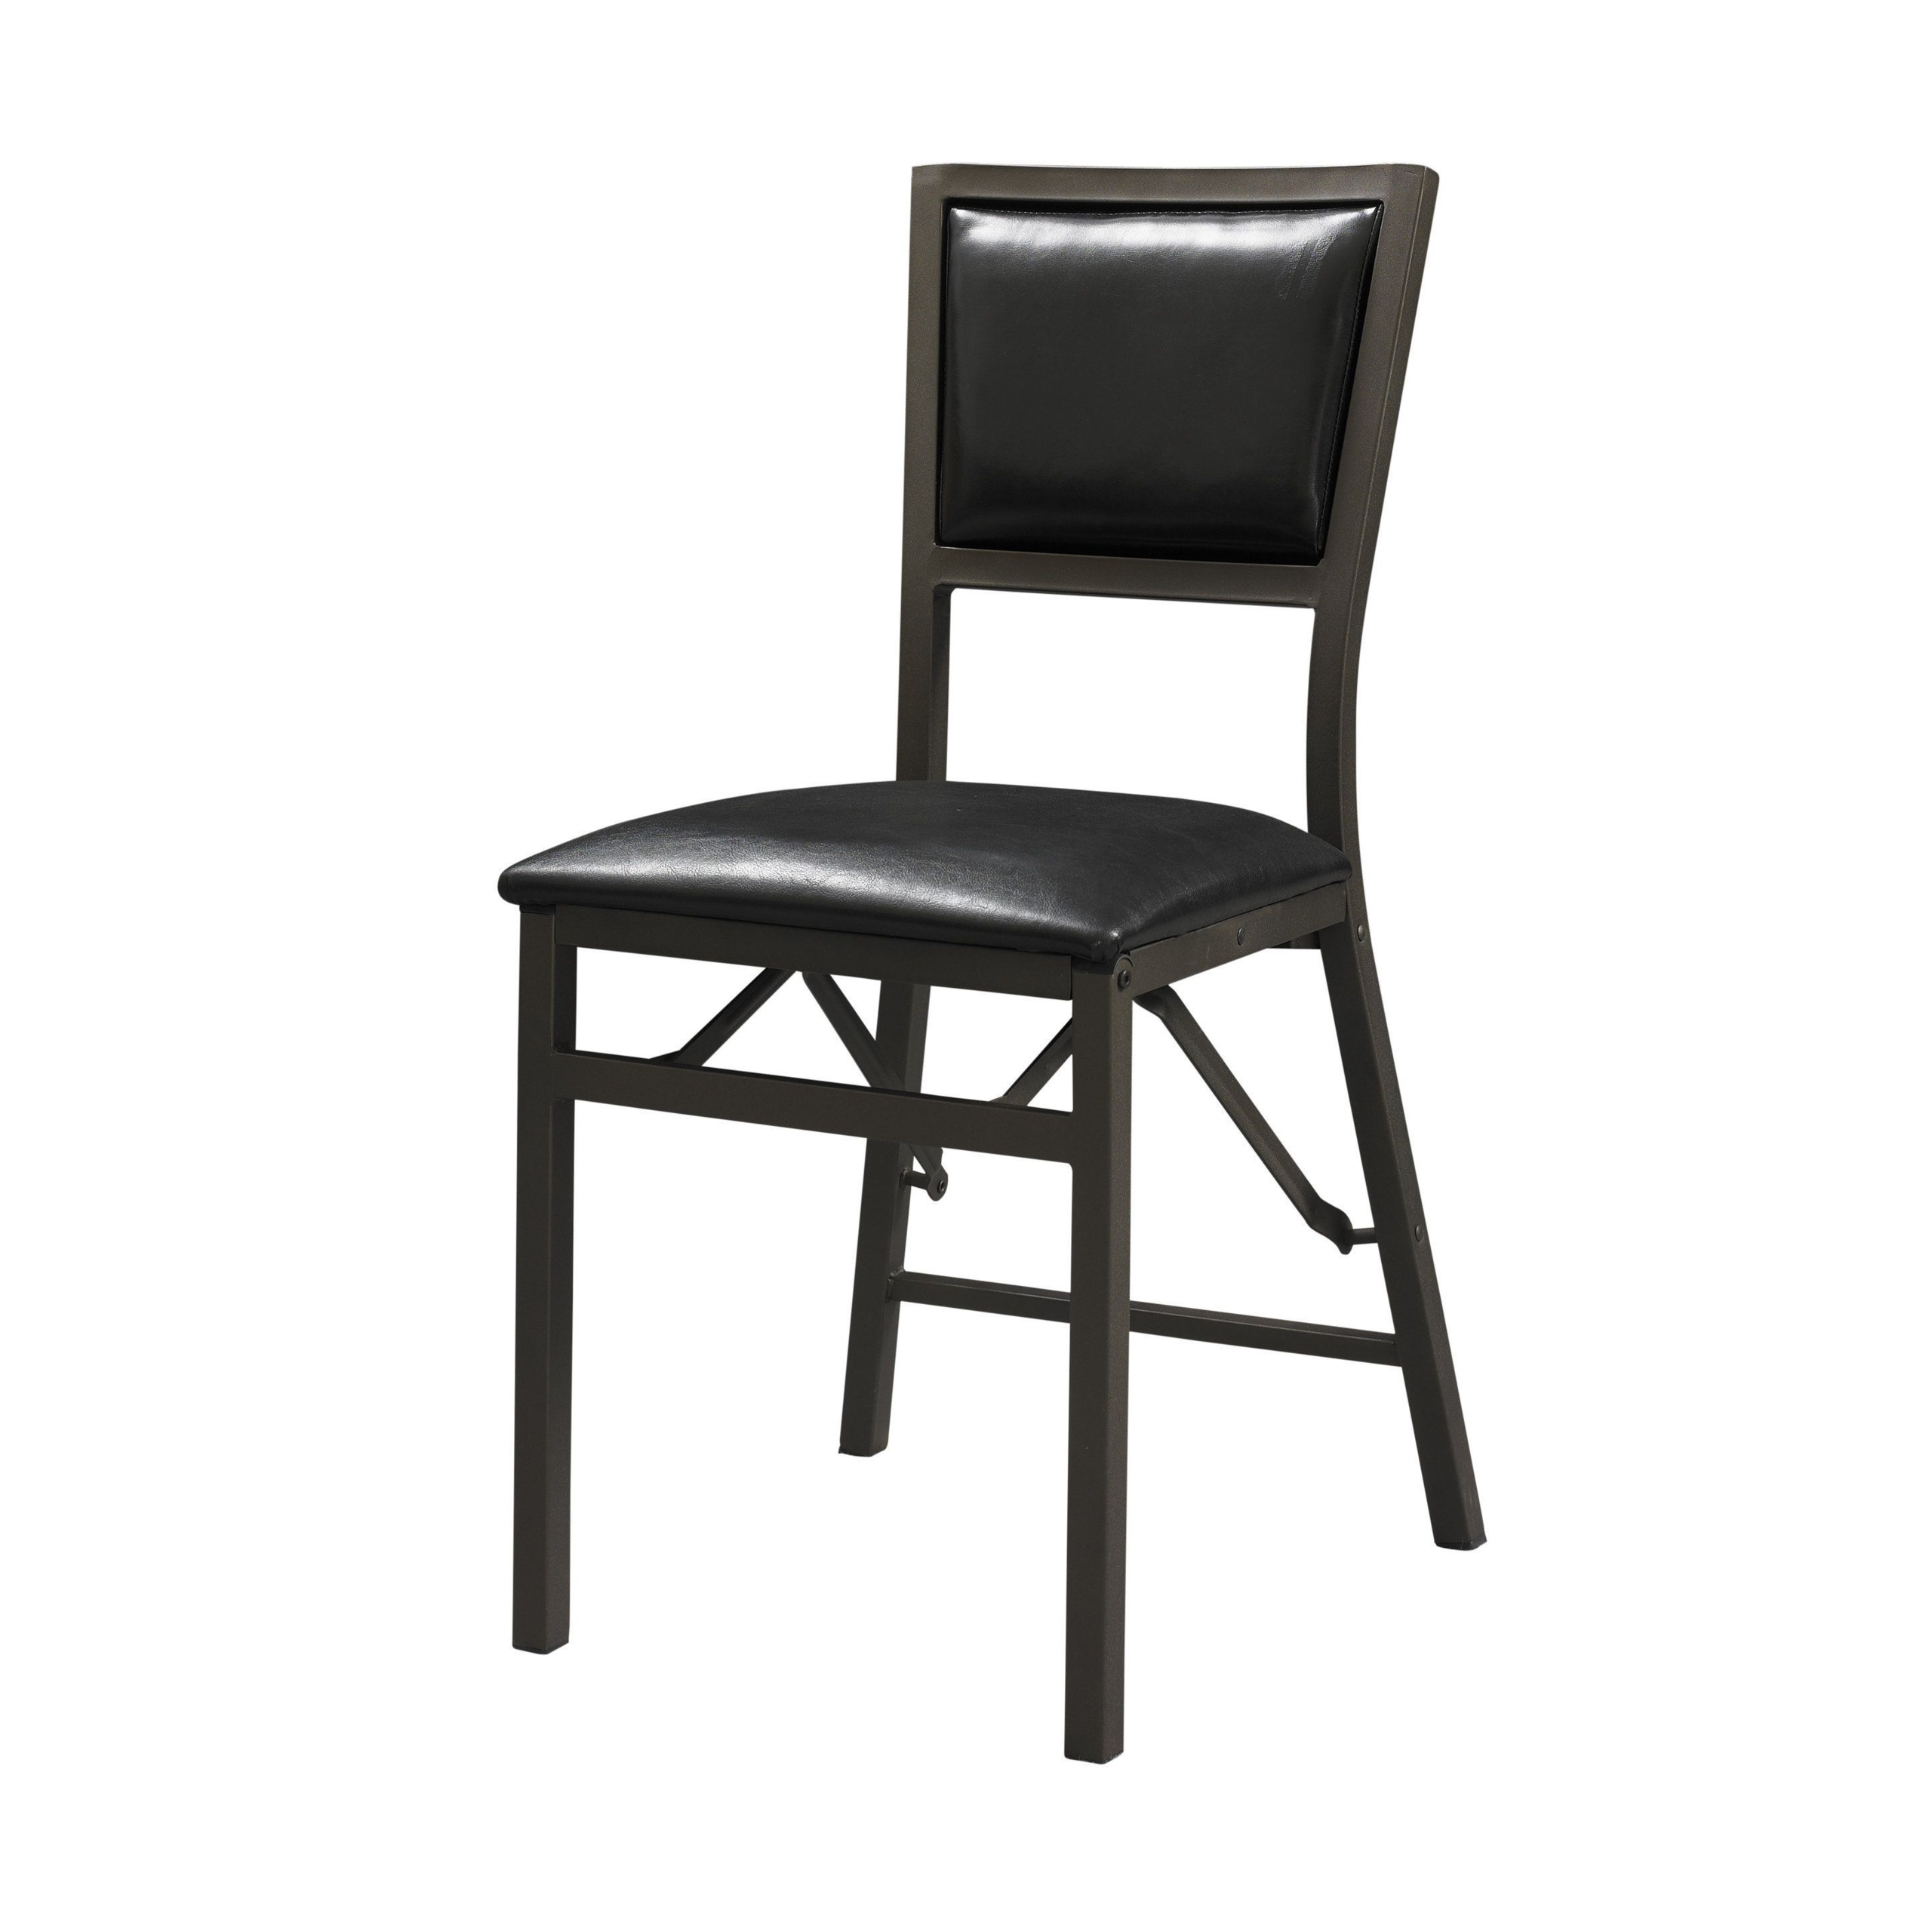 Arista Folding Chair with Padded Back